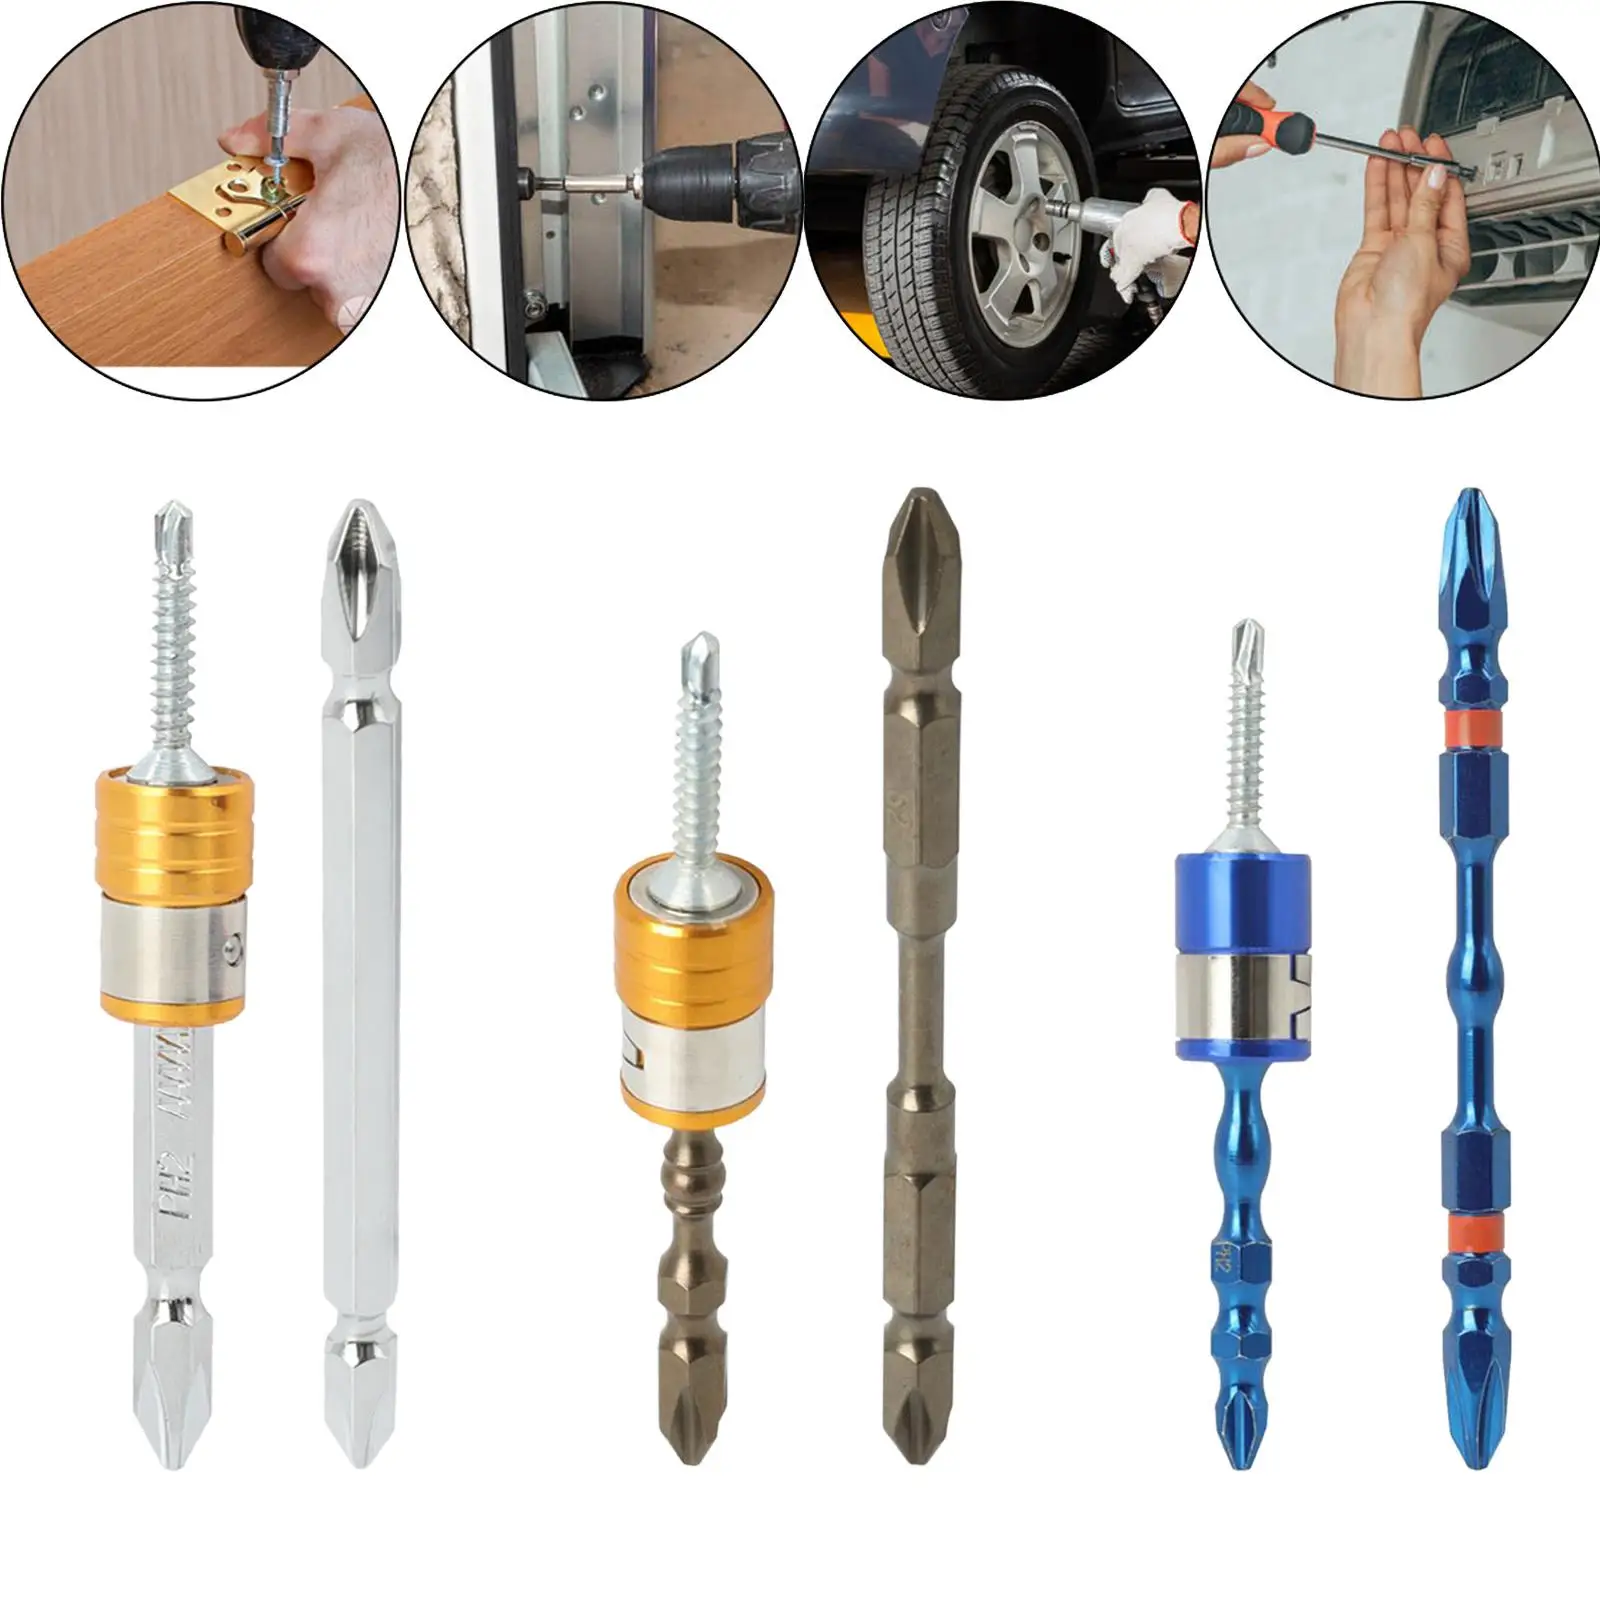  Alloy Steel Electric Screwdriver Tools with Rings Anti Fracture Durable for Plasterboard Drywall Wood